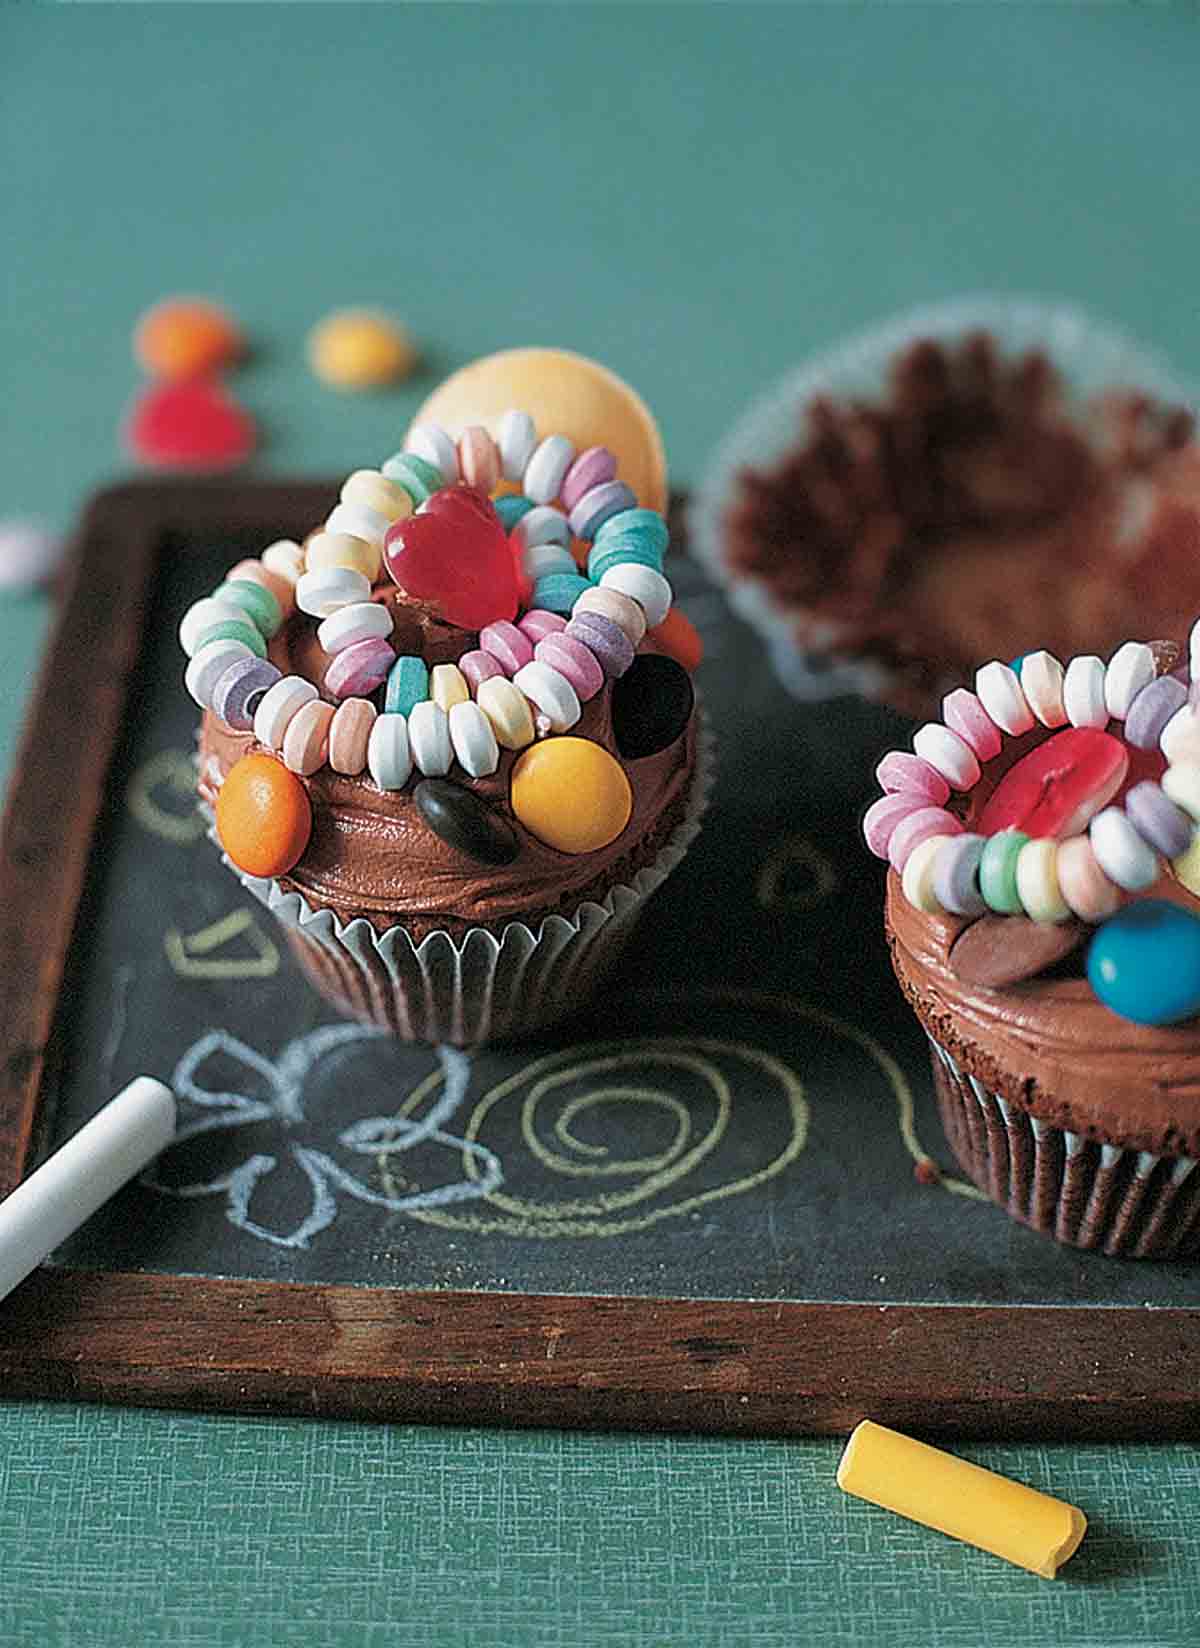 Chocolate cupcakes topped with chocolate frosting and pieces of candy on a children's chalkboard with pieces of chalk on the side.